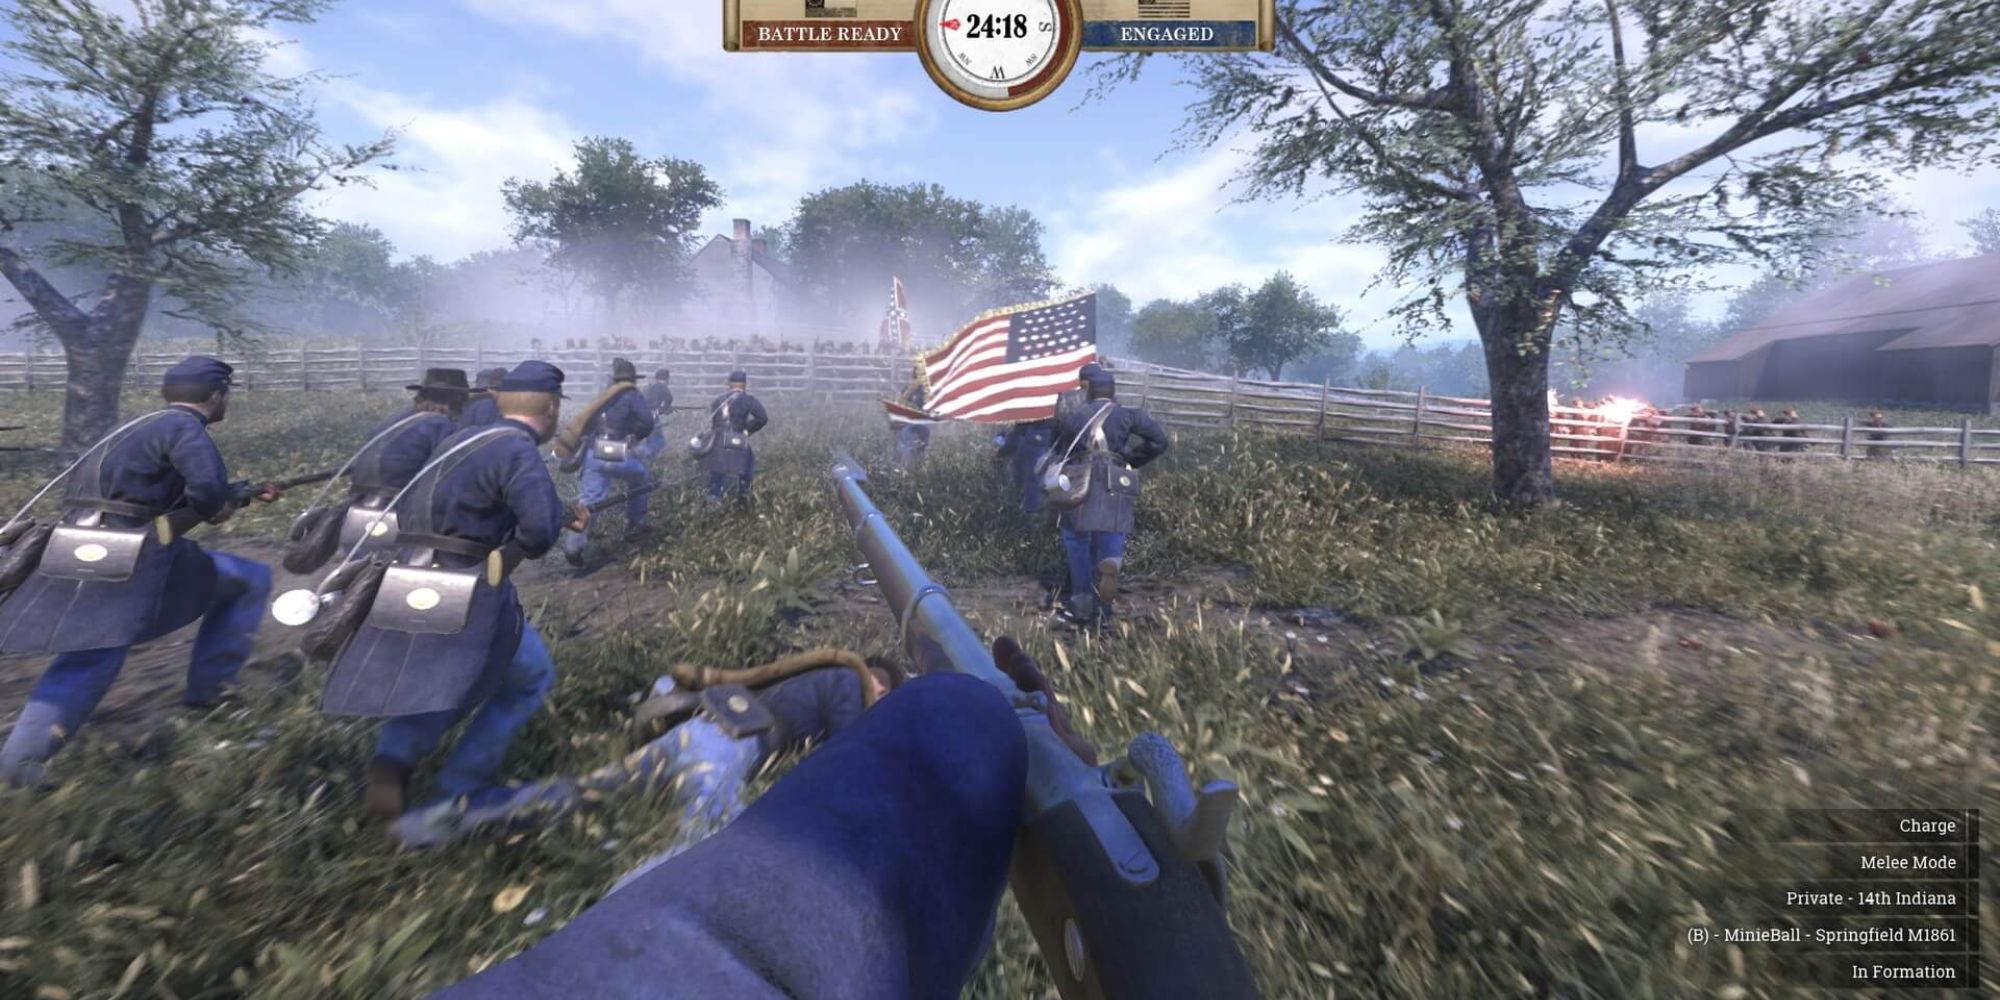 https://static0.thegamerimages.com/wordpress/wp-content/uploads/2022/09/War-of-Rights-Union-Soldiers-With-Muskets-Charging.jpg